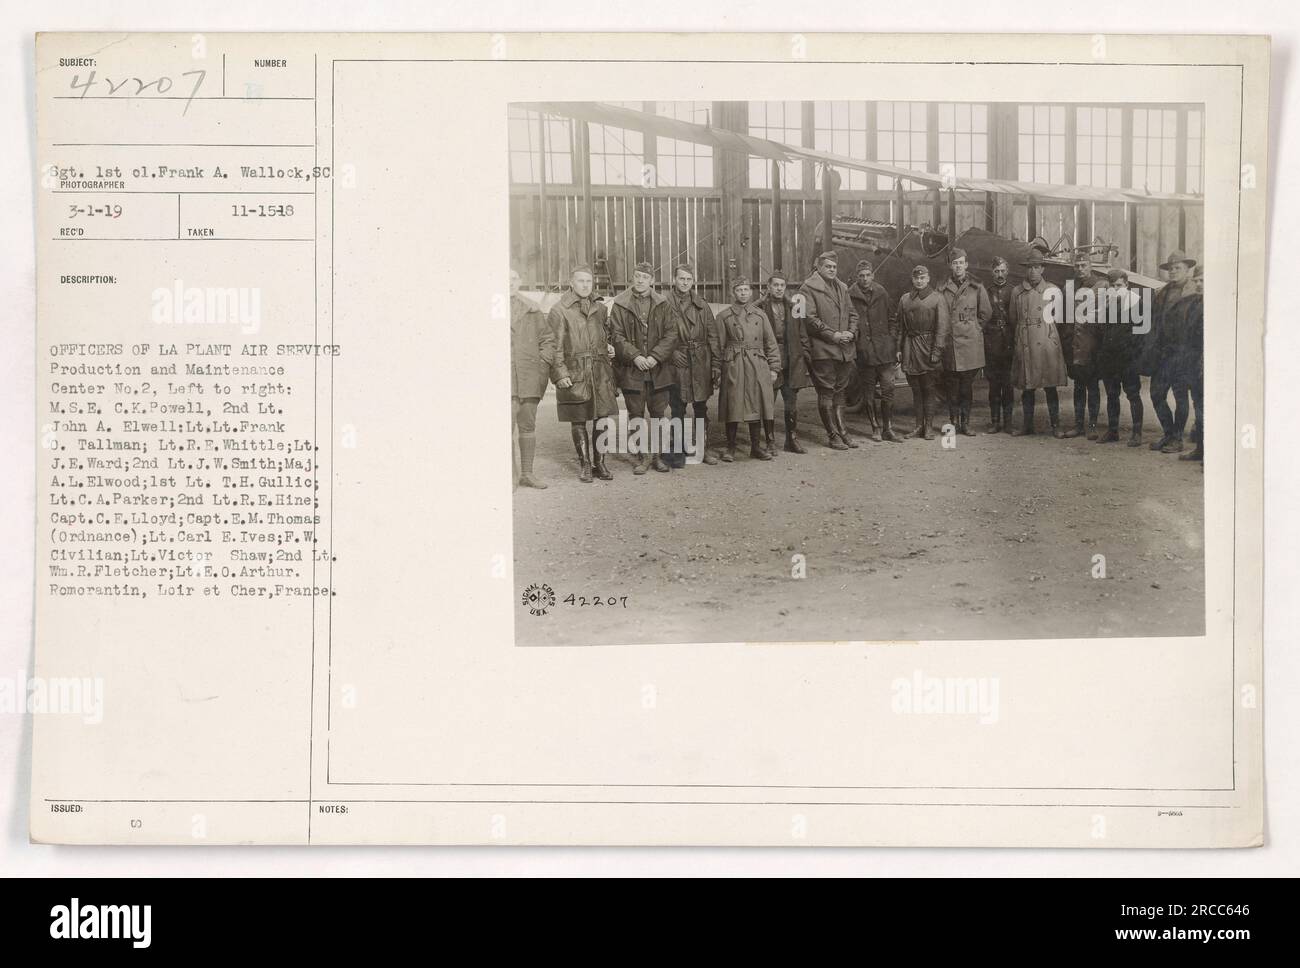 11-SC-42207 is a photograph taken by Sgt. Prank A. Wellock on March 1, 1919, at La Plant Air Service Production and Maintenance Center No. 2 in Romorantin, Loir et Cher, France. The image shows a group of officers standing together. The names and ranks of the officers are listed in the description. Stock Photo